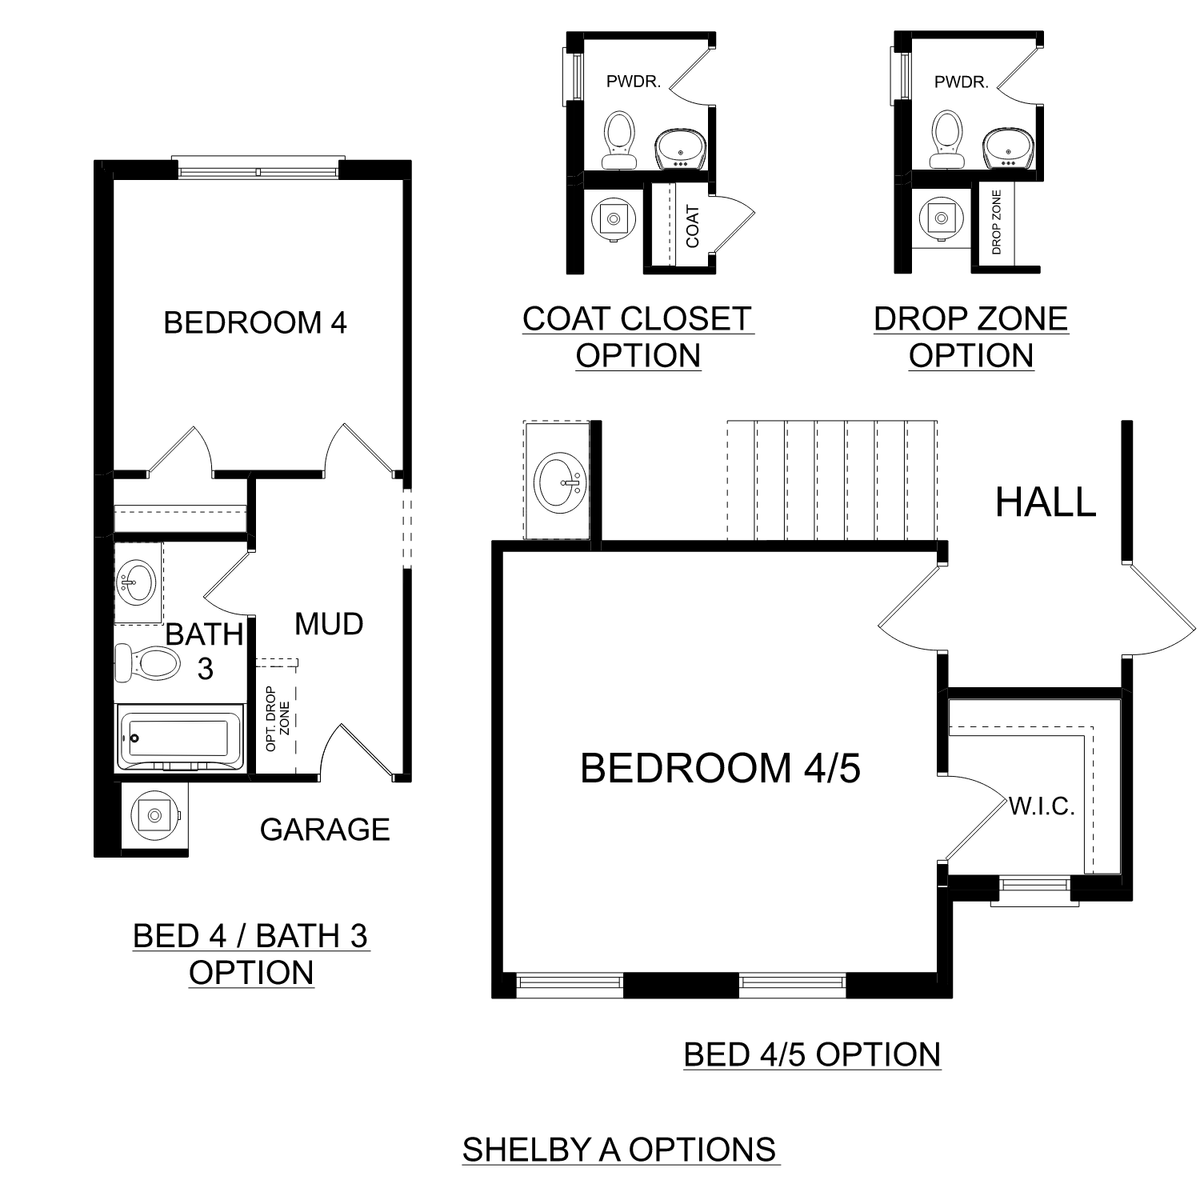 3 - The Shelby A buildable floor plan layout in Davidson Homes' Monteagle Cove community.